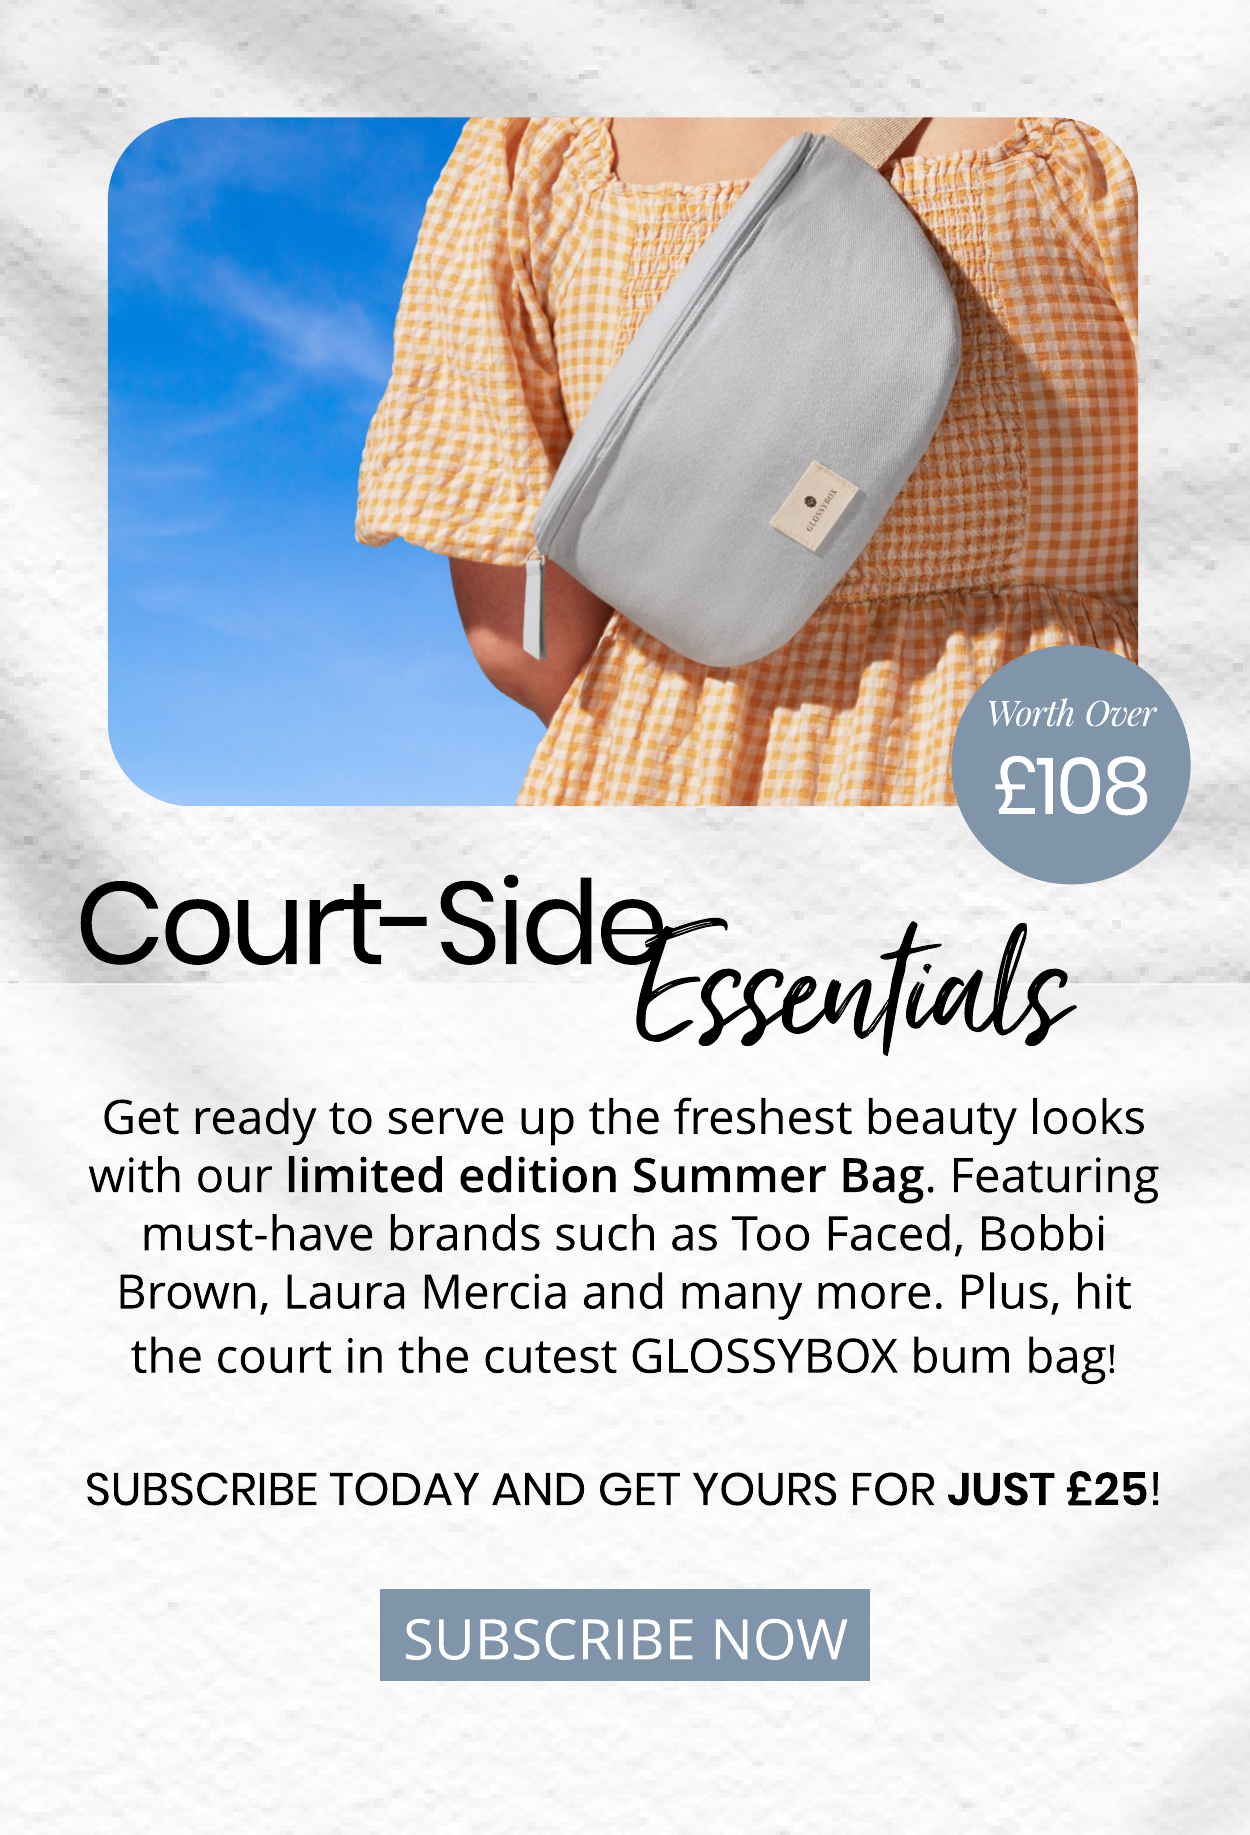 glossybox uk: Court-side essentials for just £25 🎾